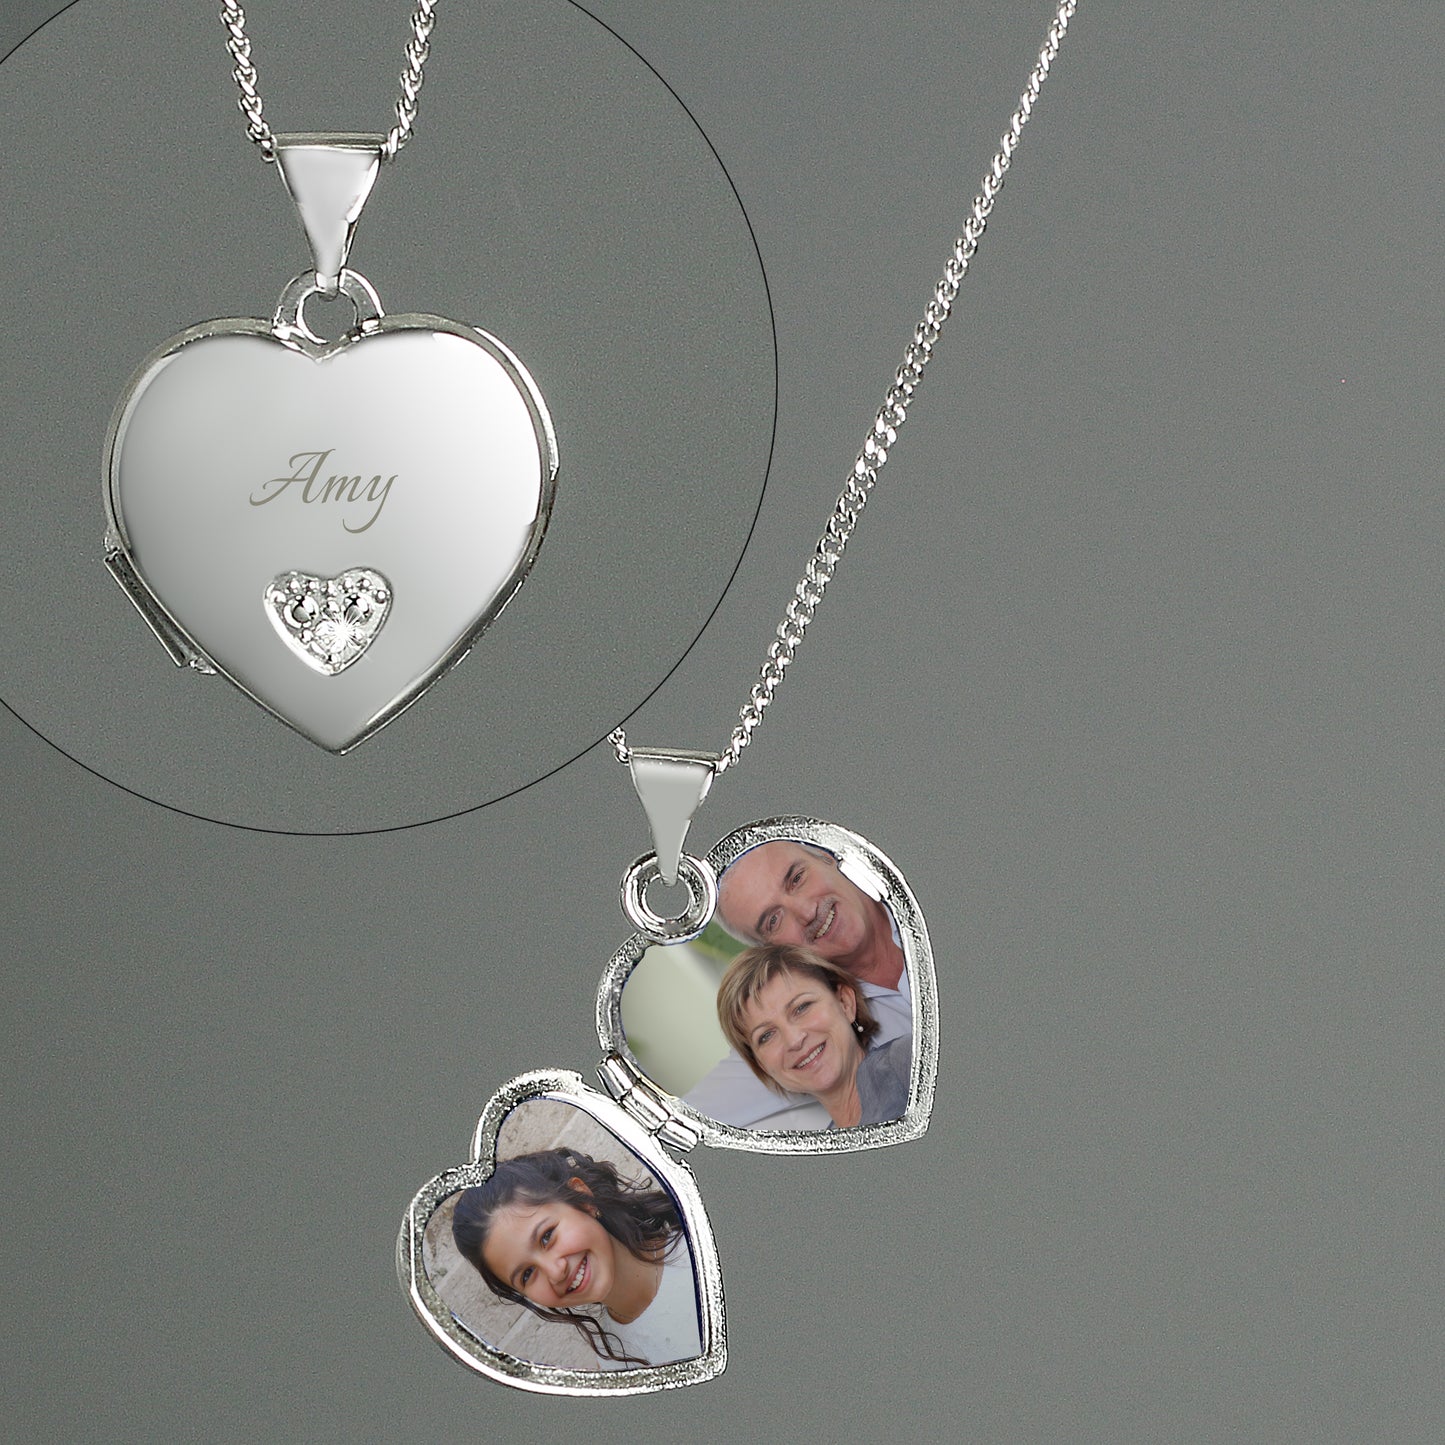 childs sterling silver locket engraved with name and showing interior with two photos